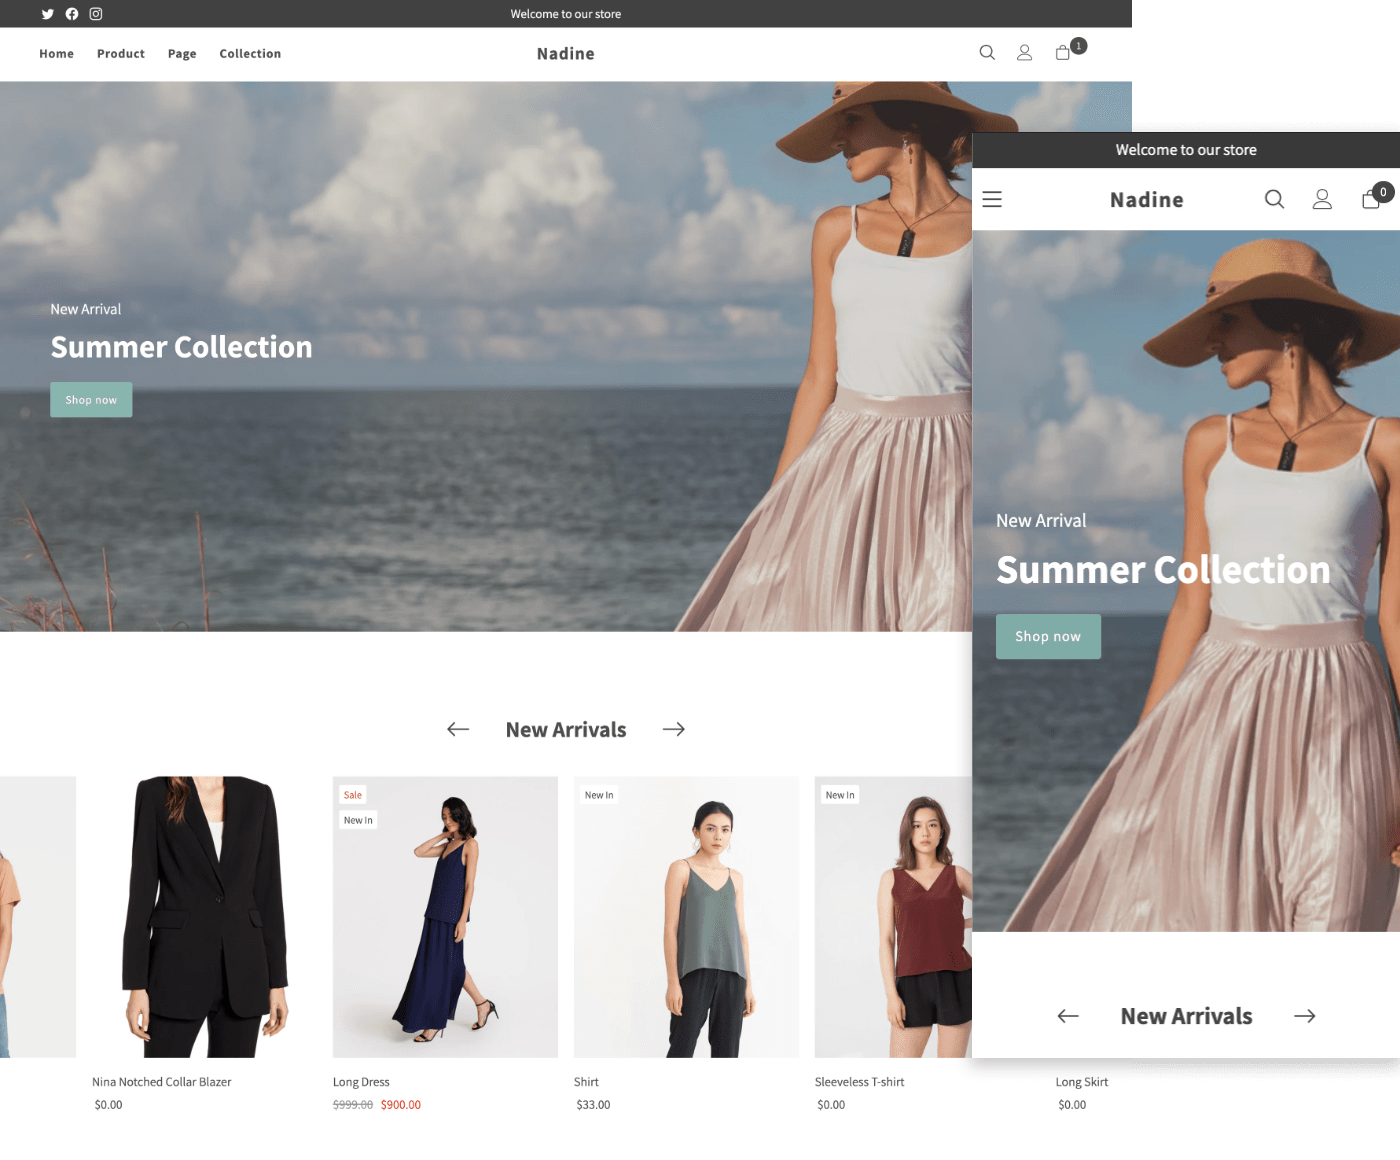 Meet our new Nadine Shopify Theme